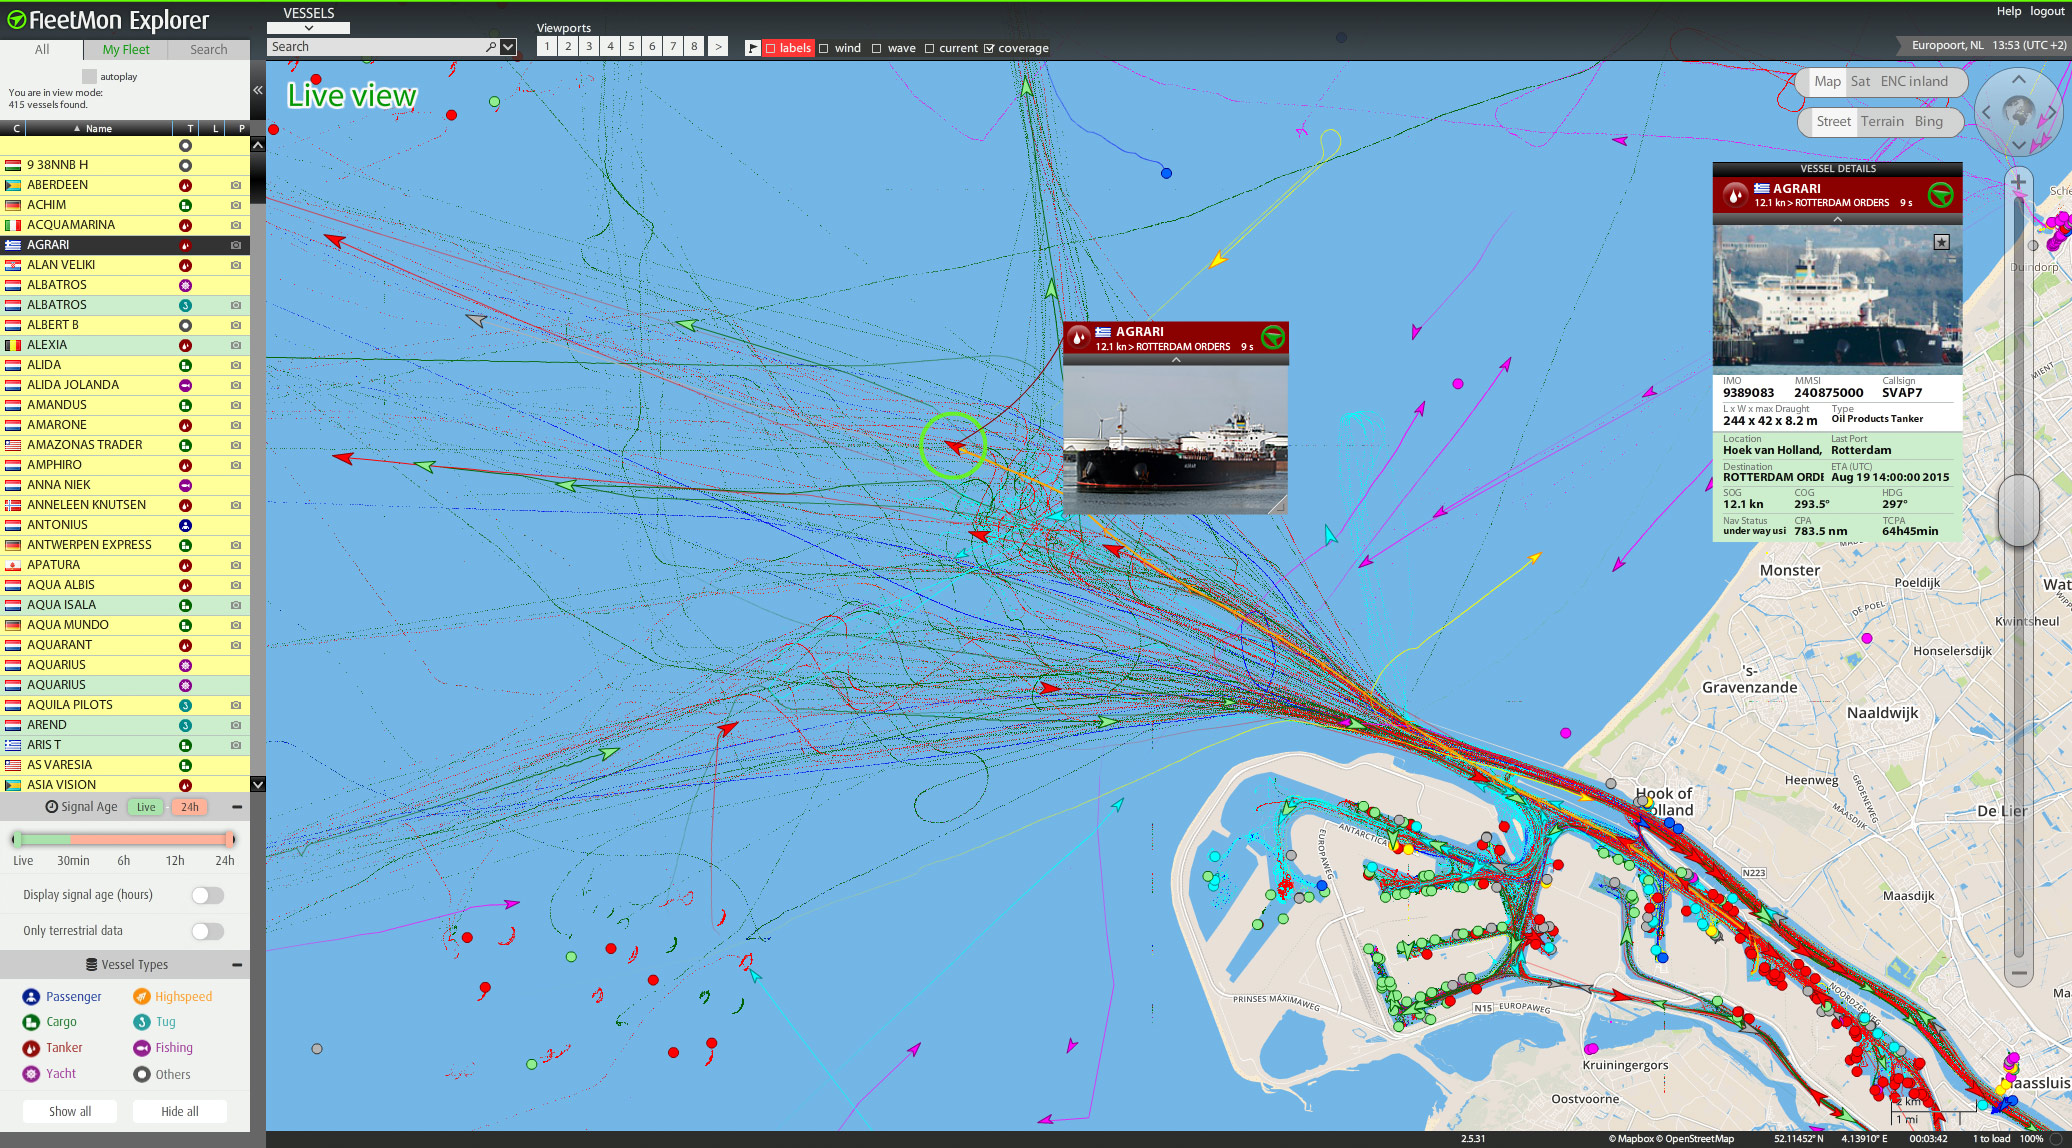 Live vessel tracking and monitoring with FleetMon Explorer